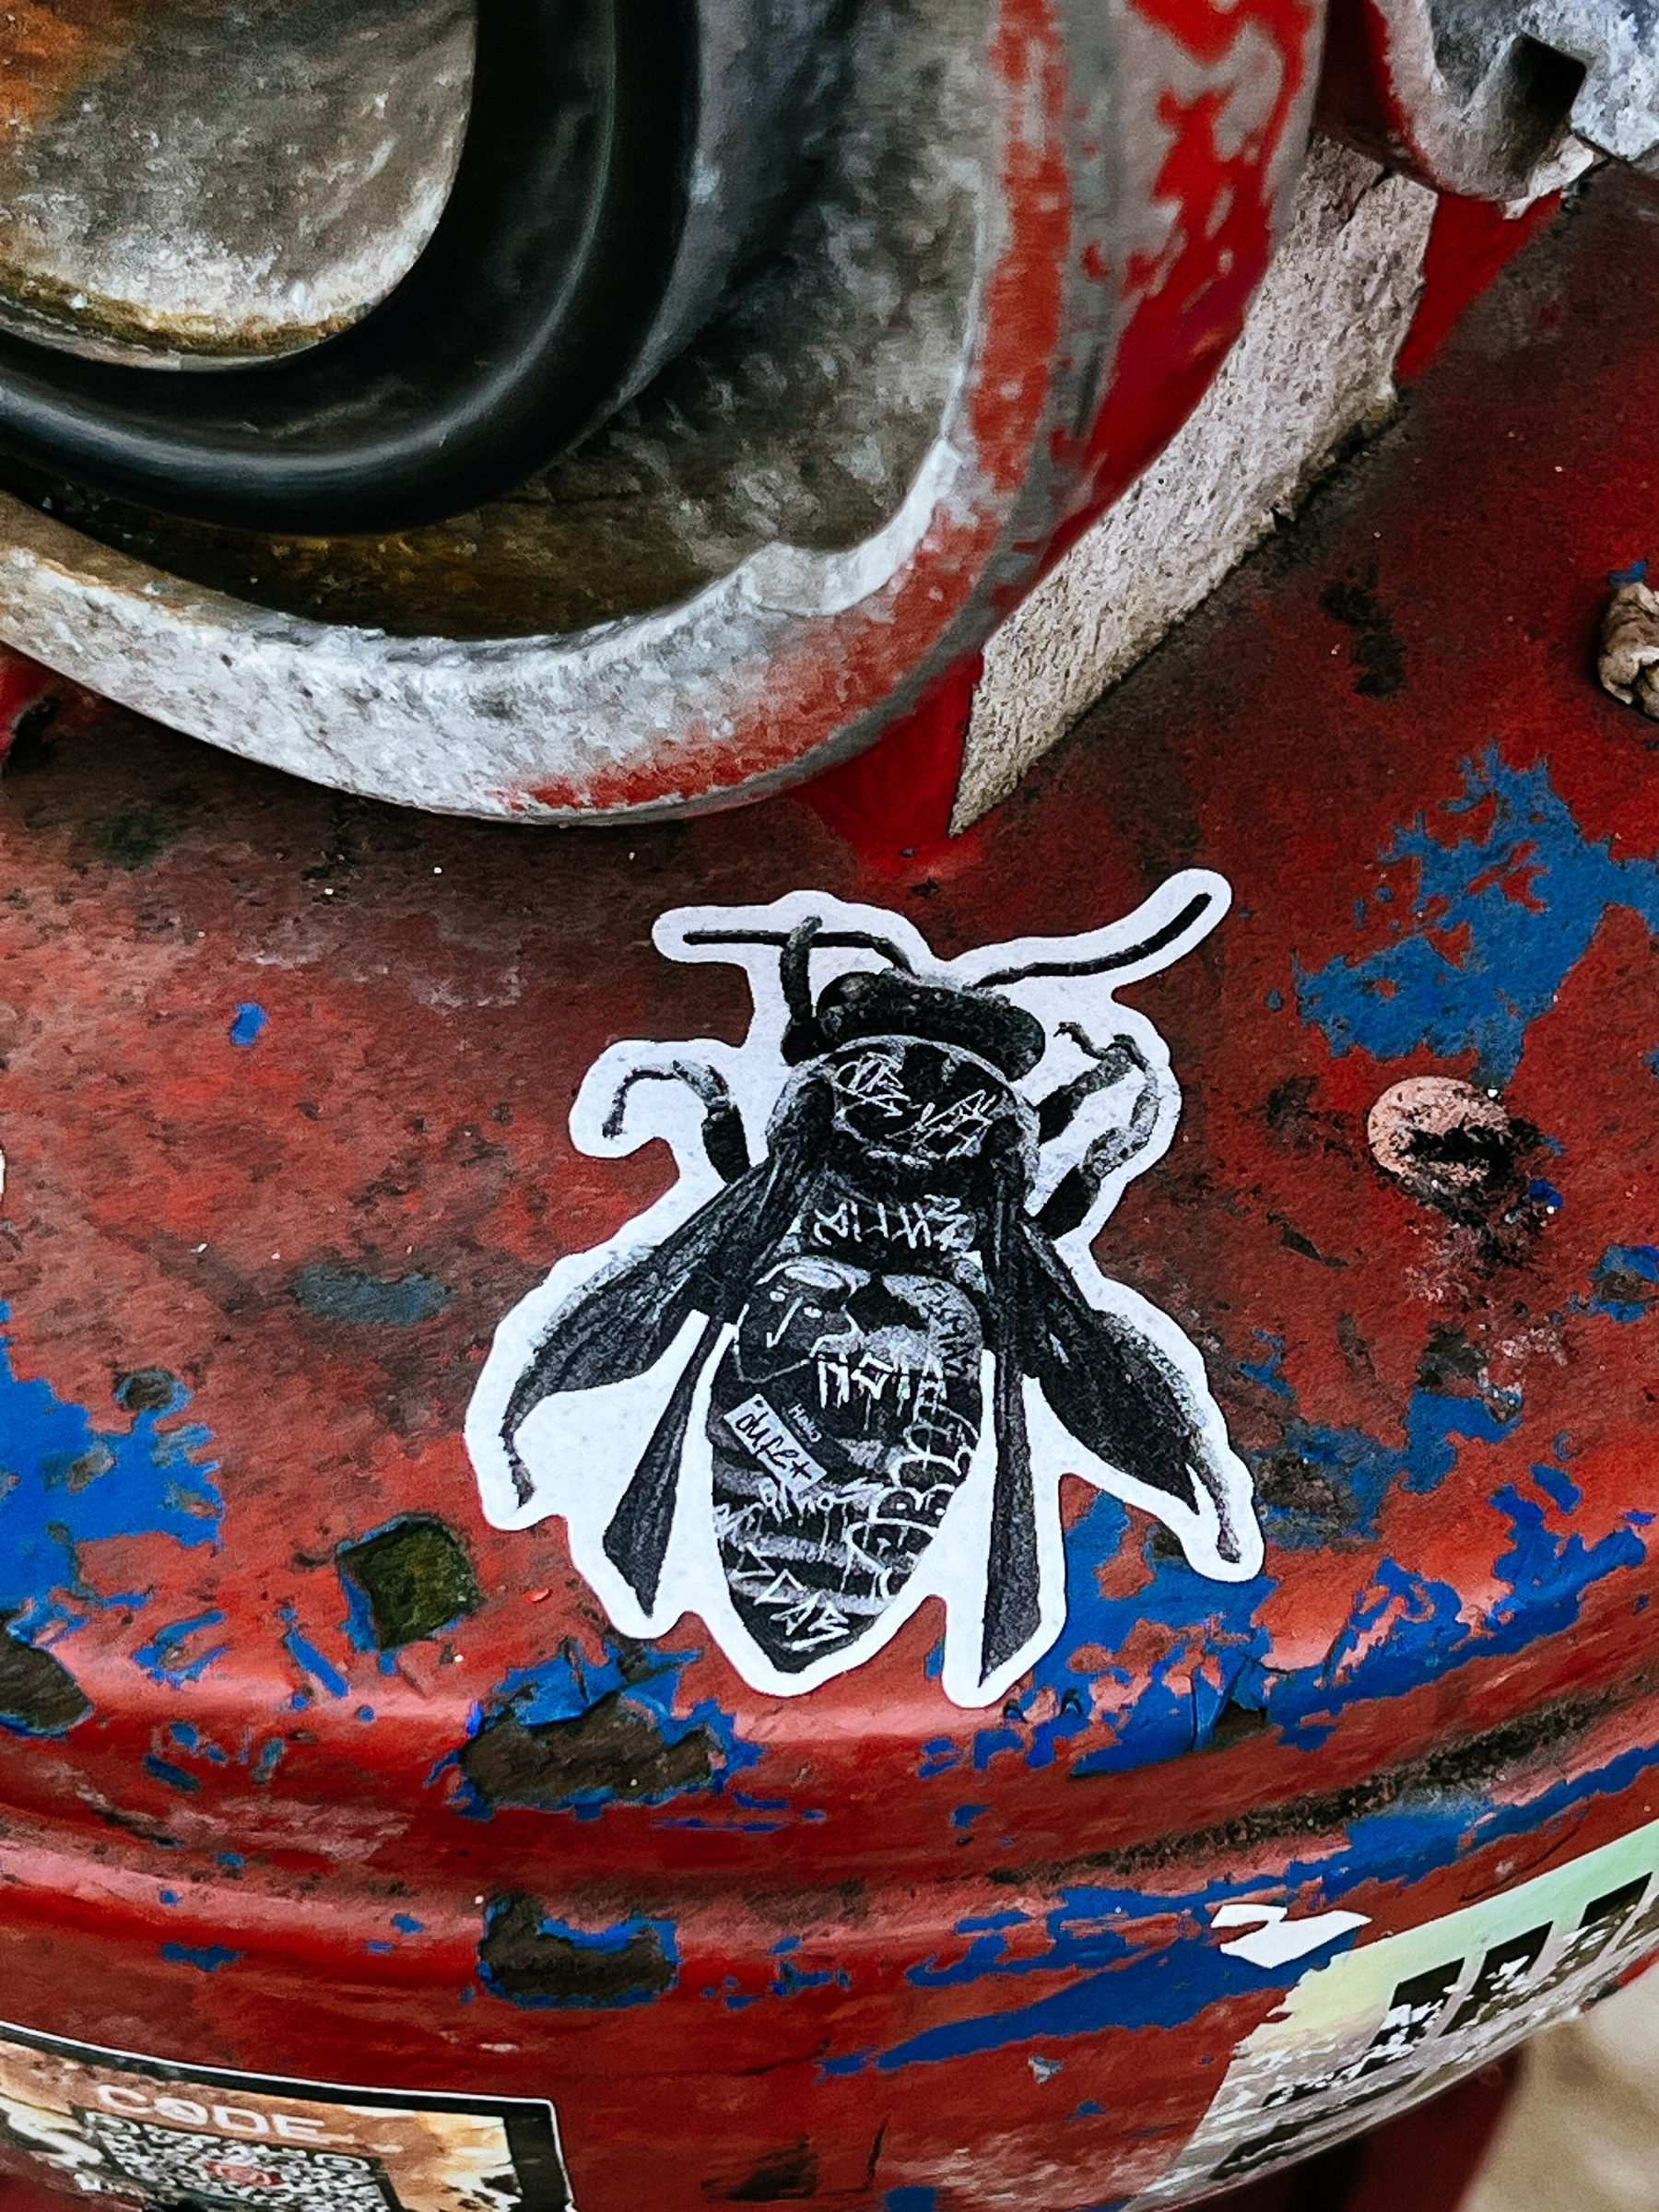 Sticker of a bee with intricate patterns adheres to a worn, red fire hydrant with peeling blue paint.